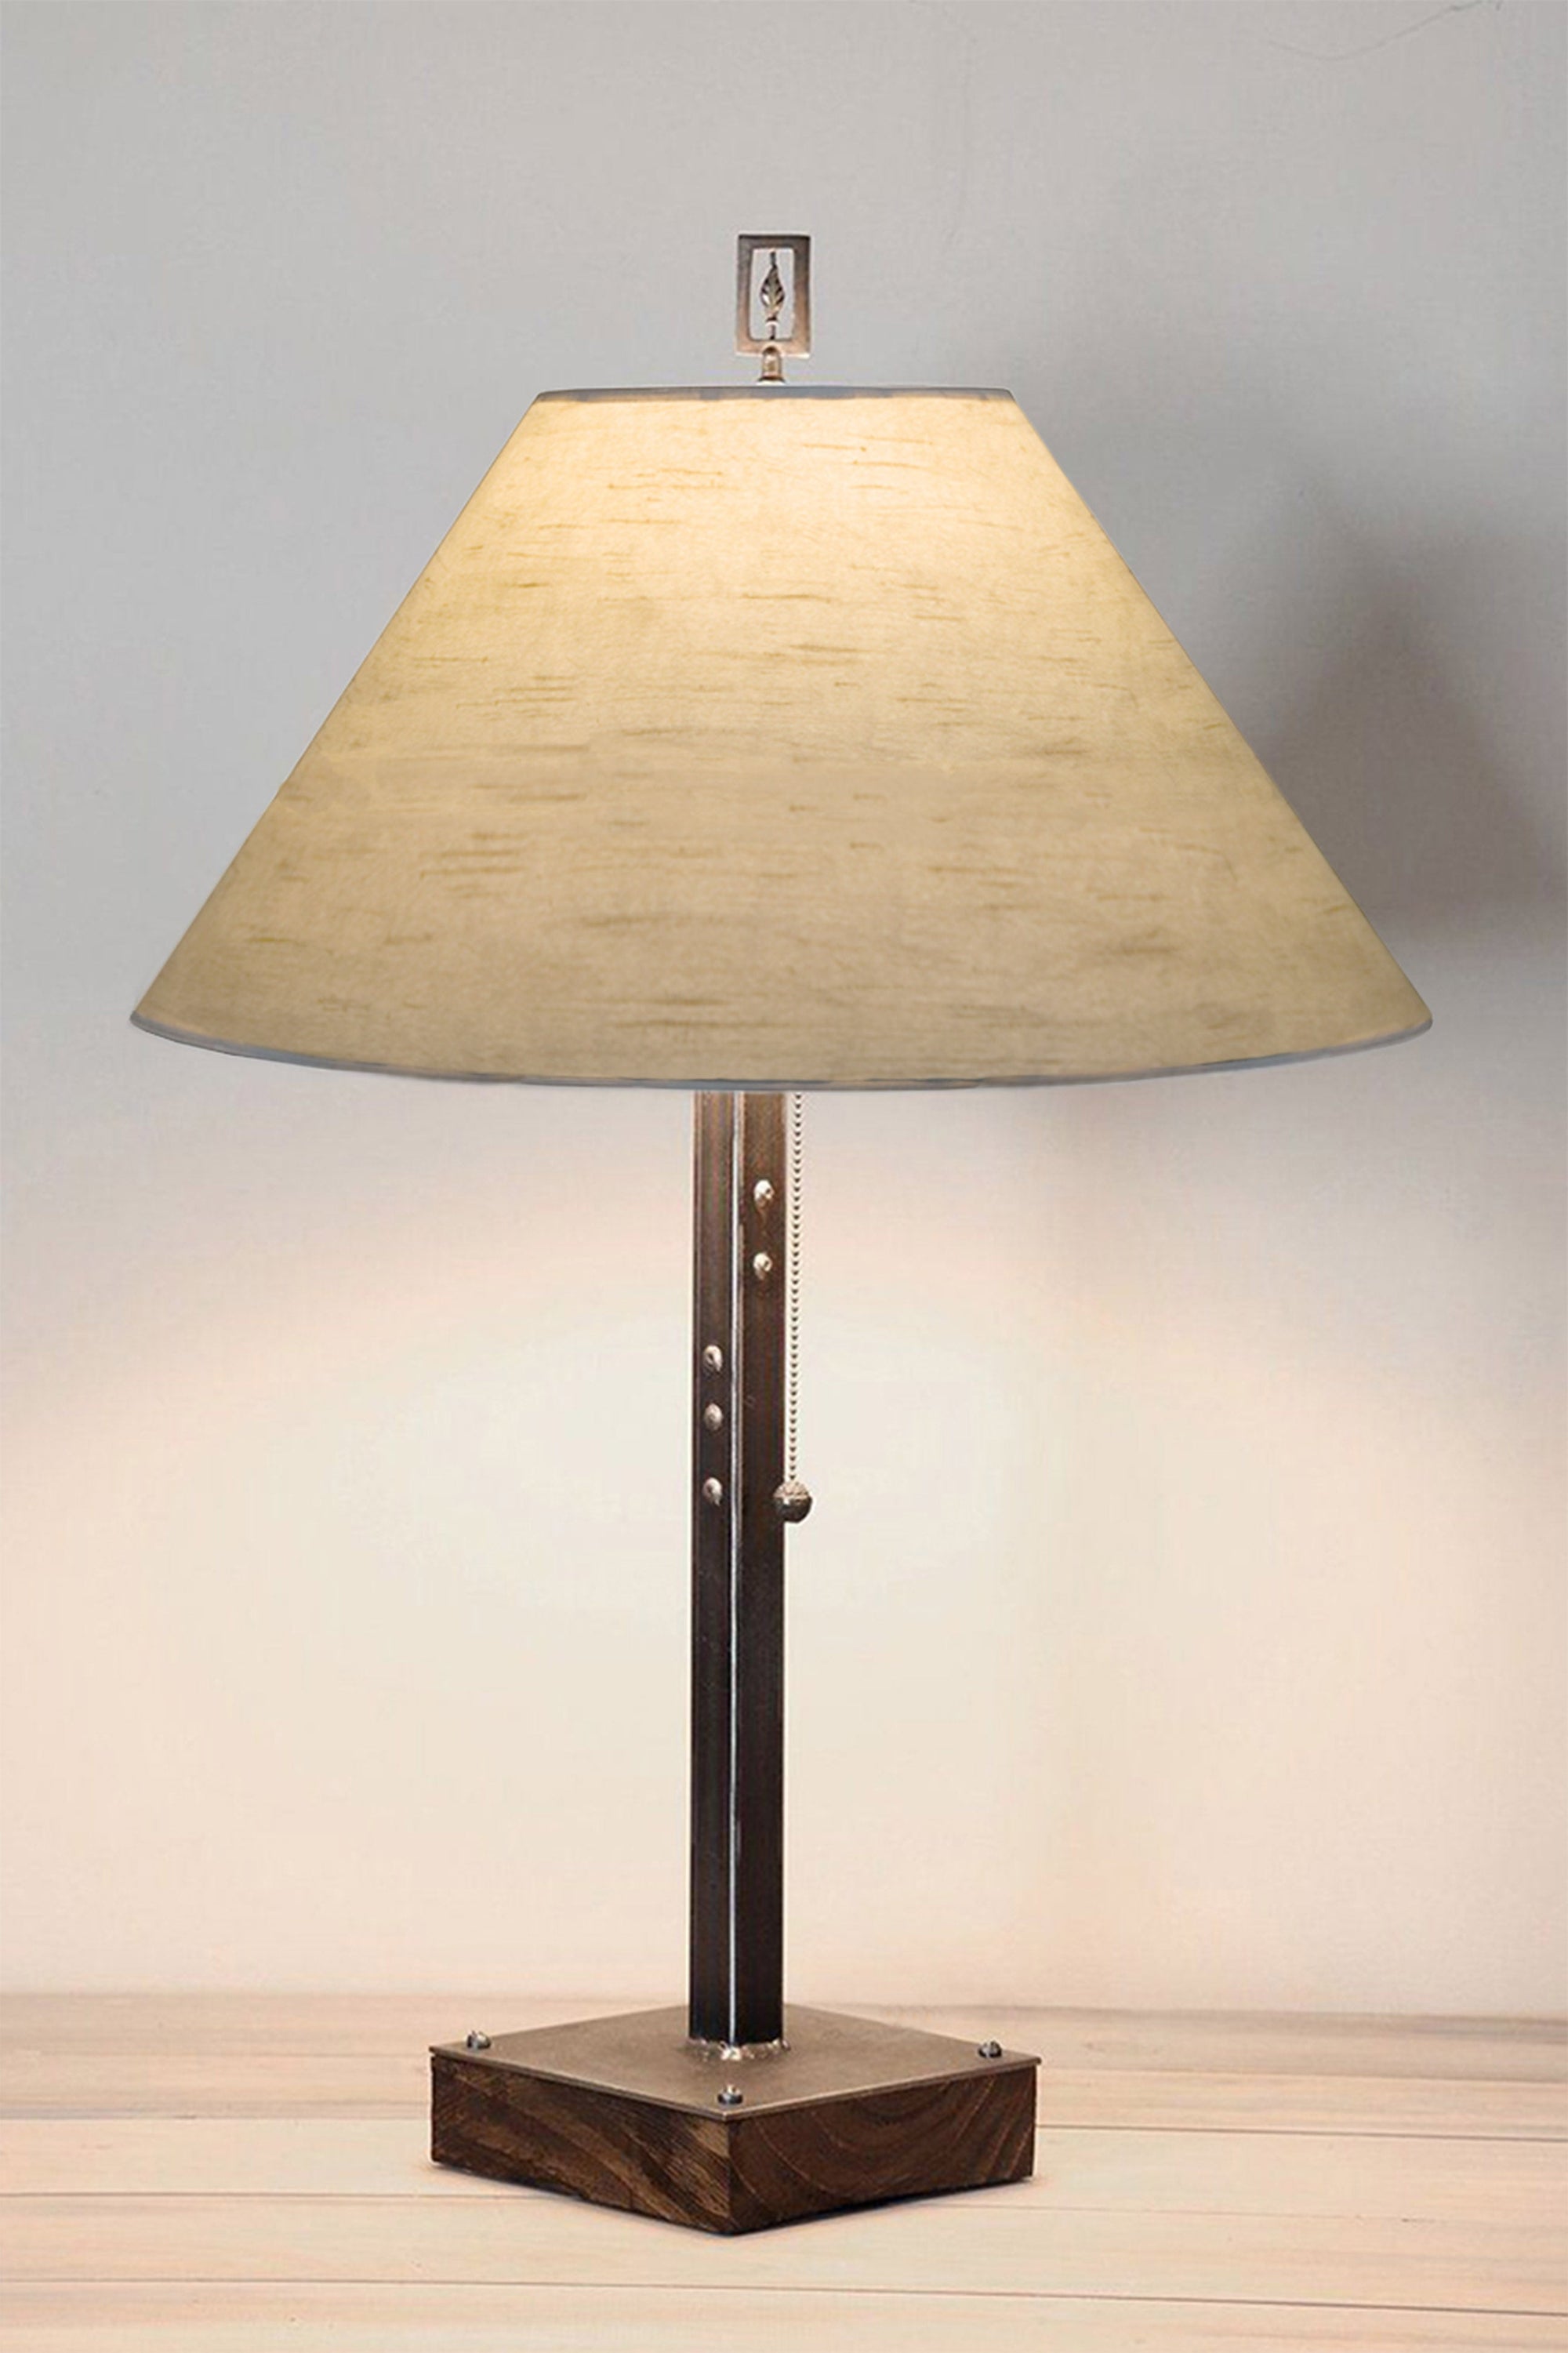 Janna Ugone & Co Table Lamps Steel Table Lamp on Wood with Large Conical Shade in Simply Birch